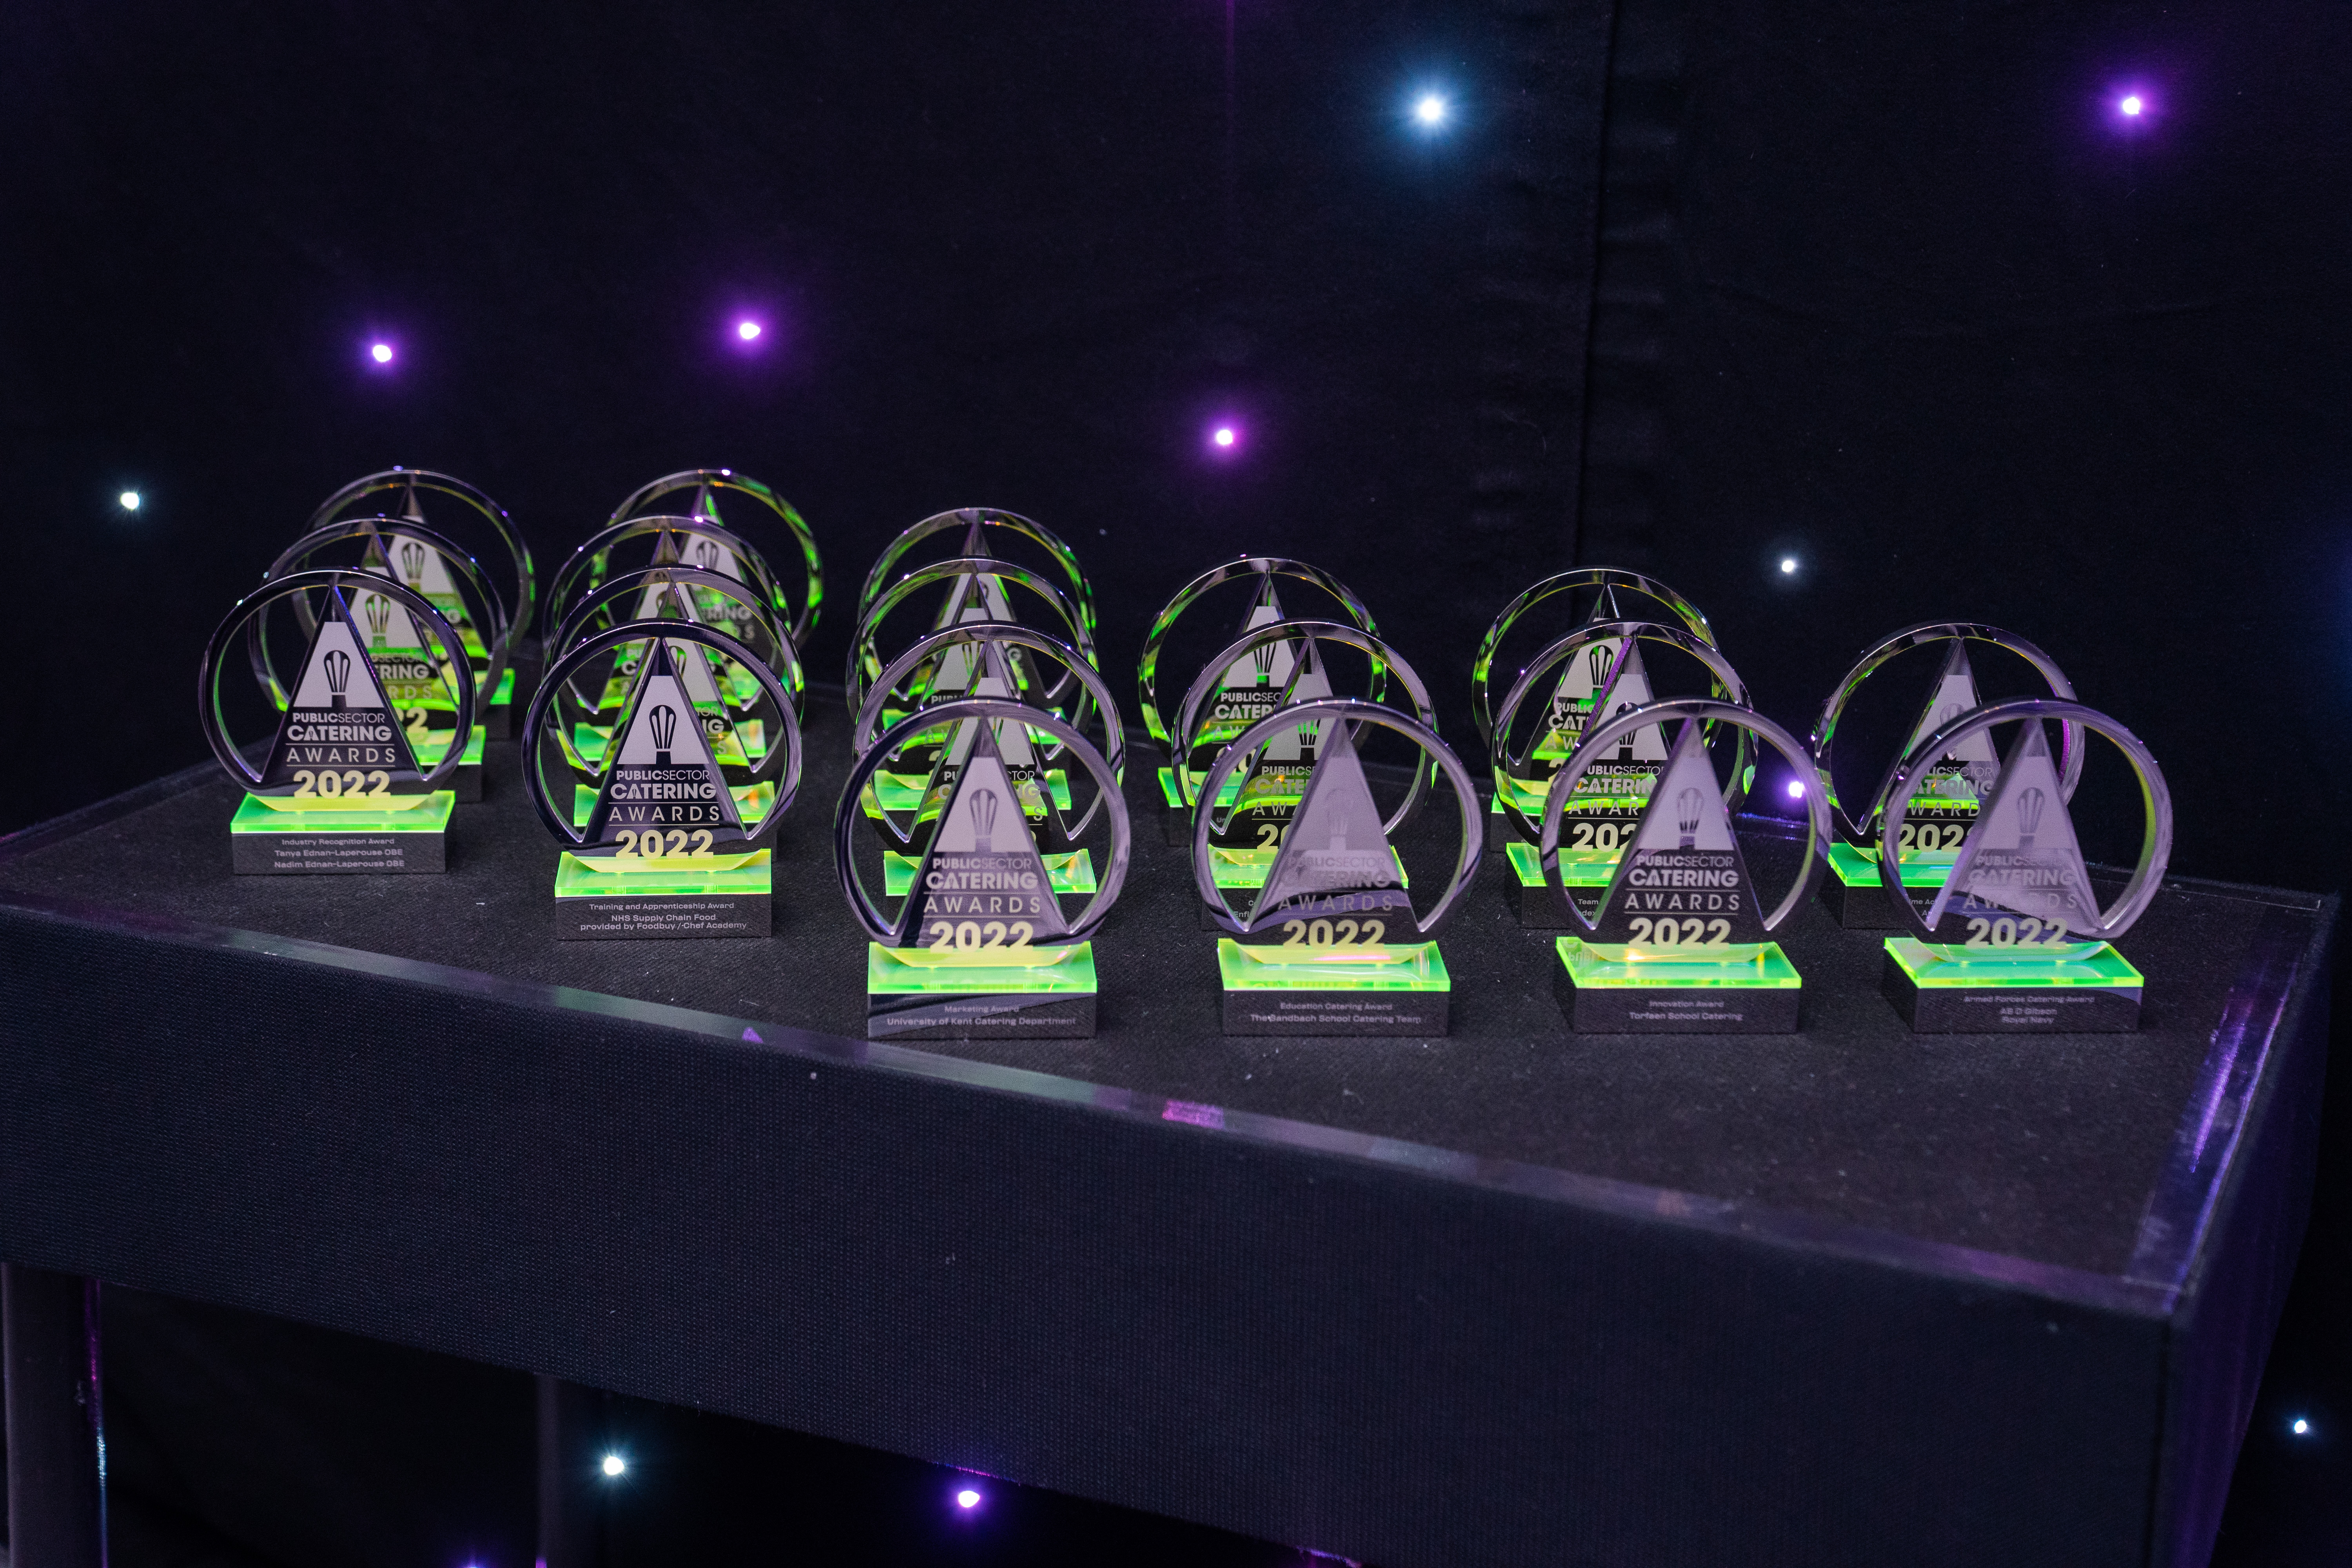 PSC Awards trophies 